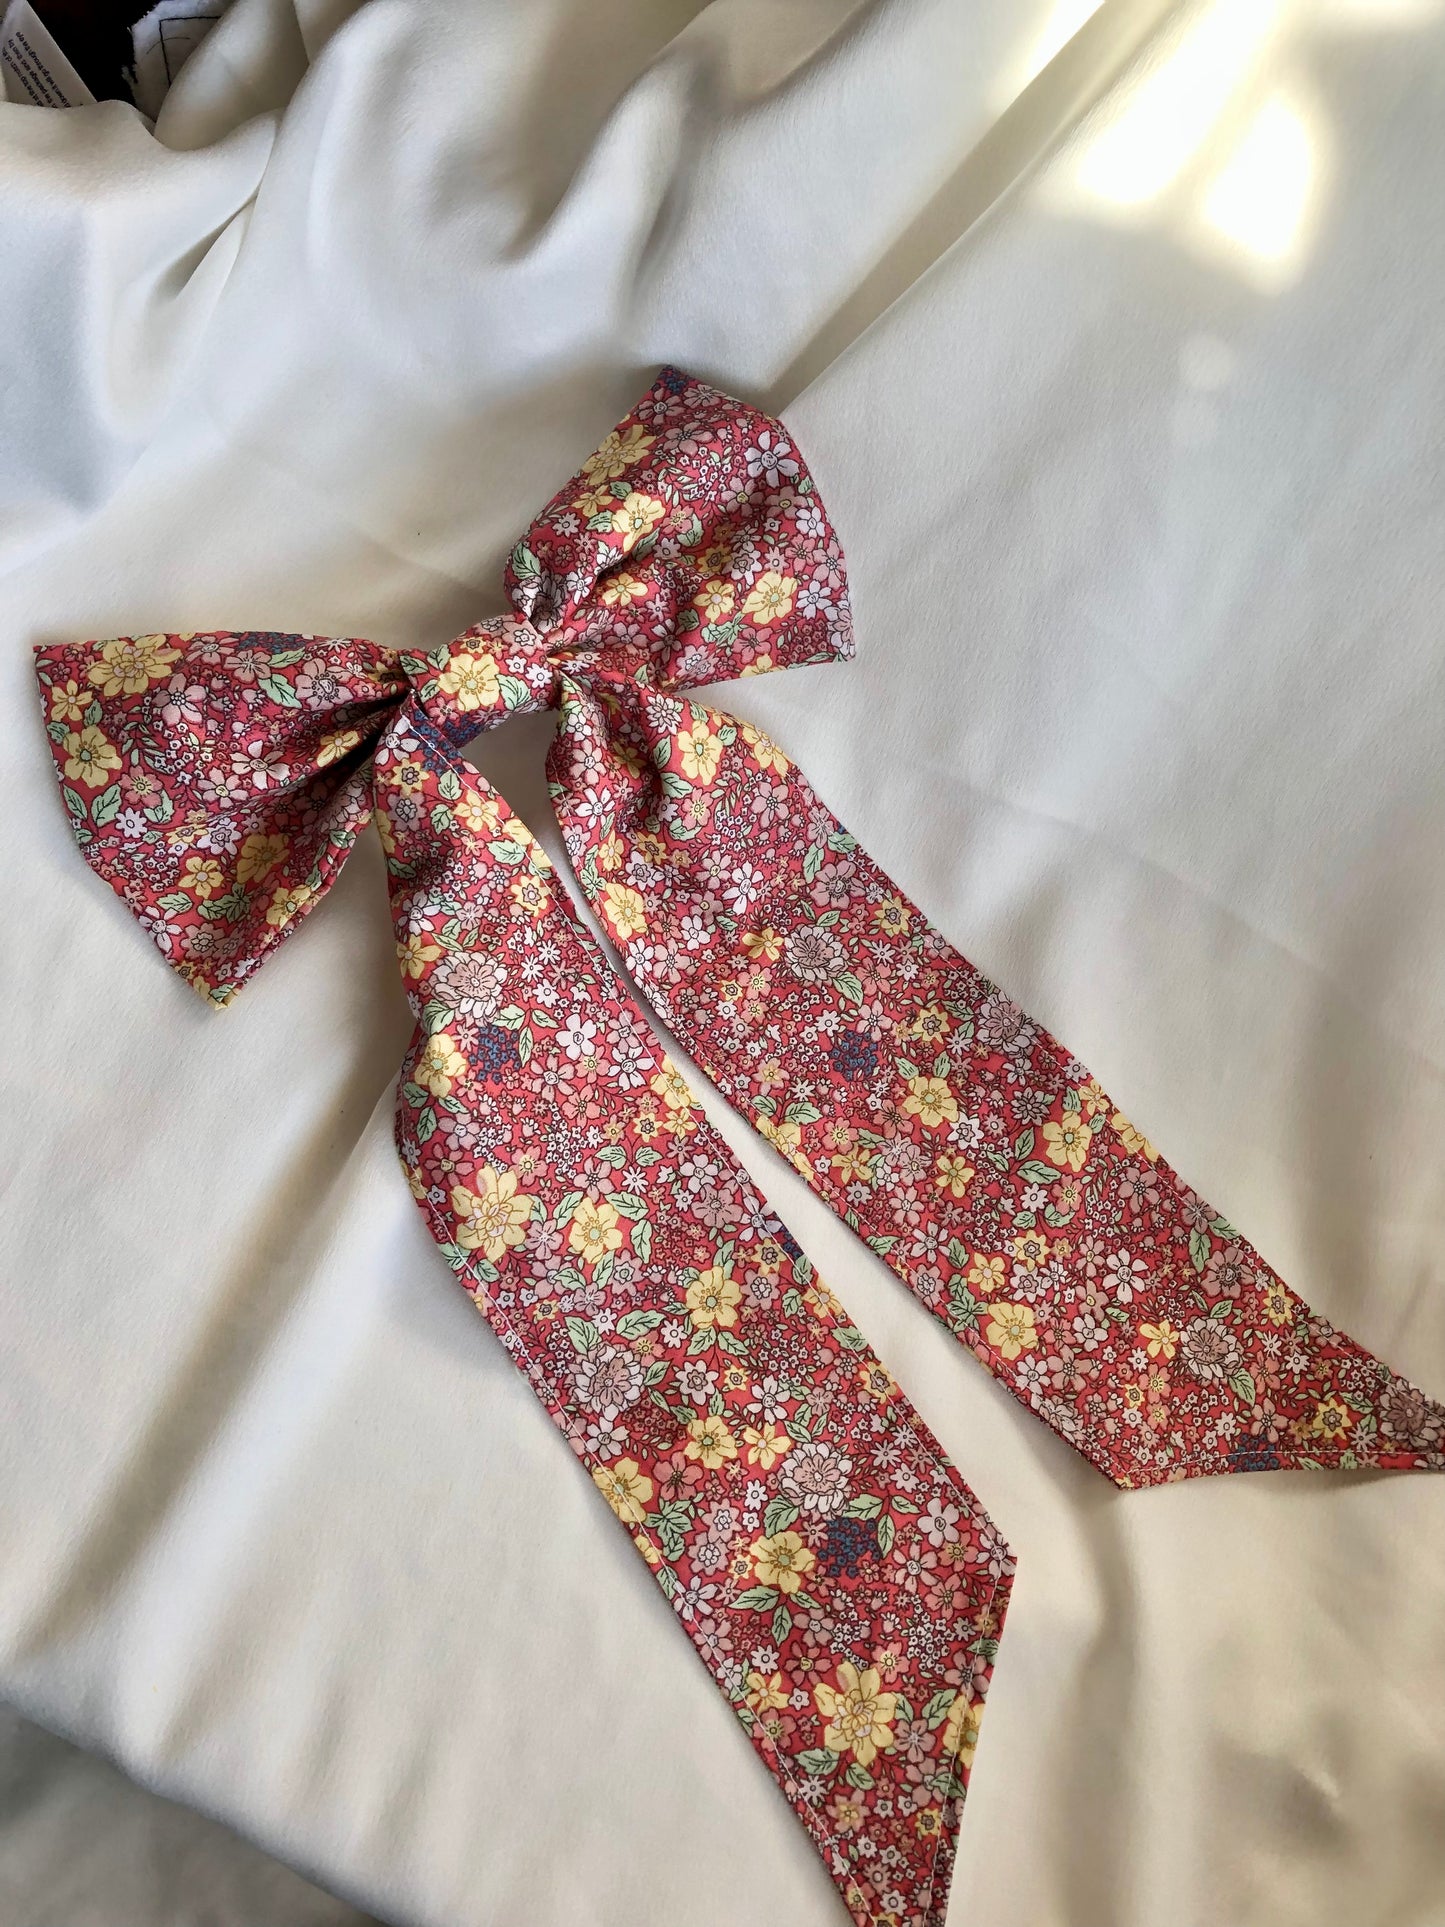 Floral Hair Bow Clips - choose style & pattern